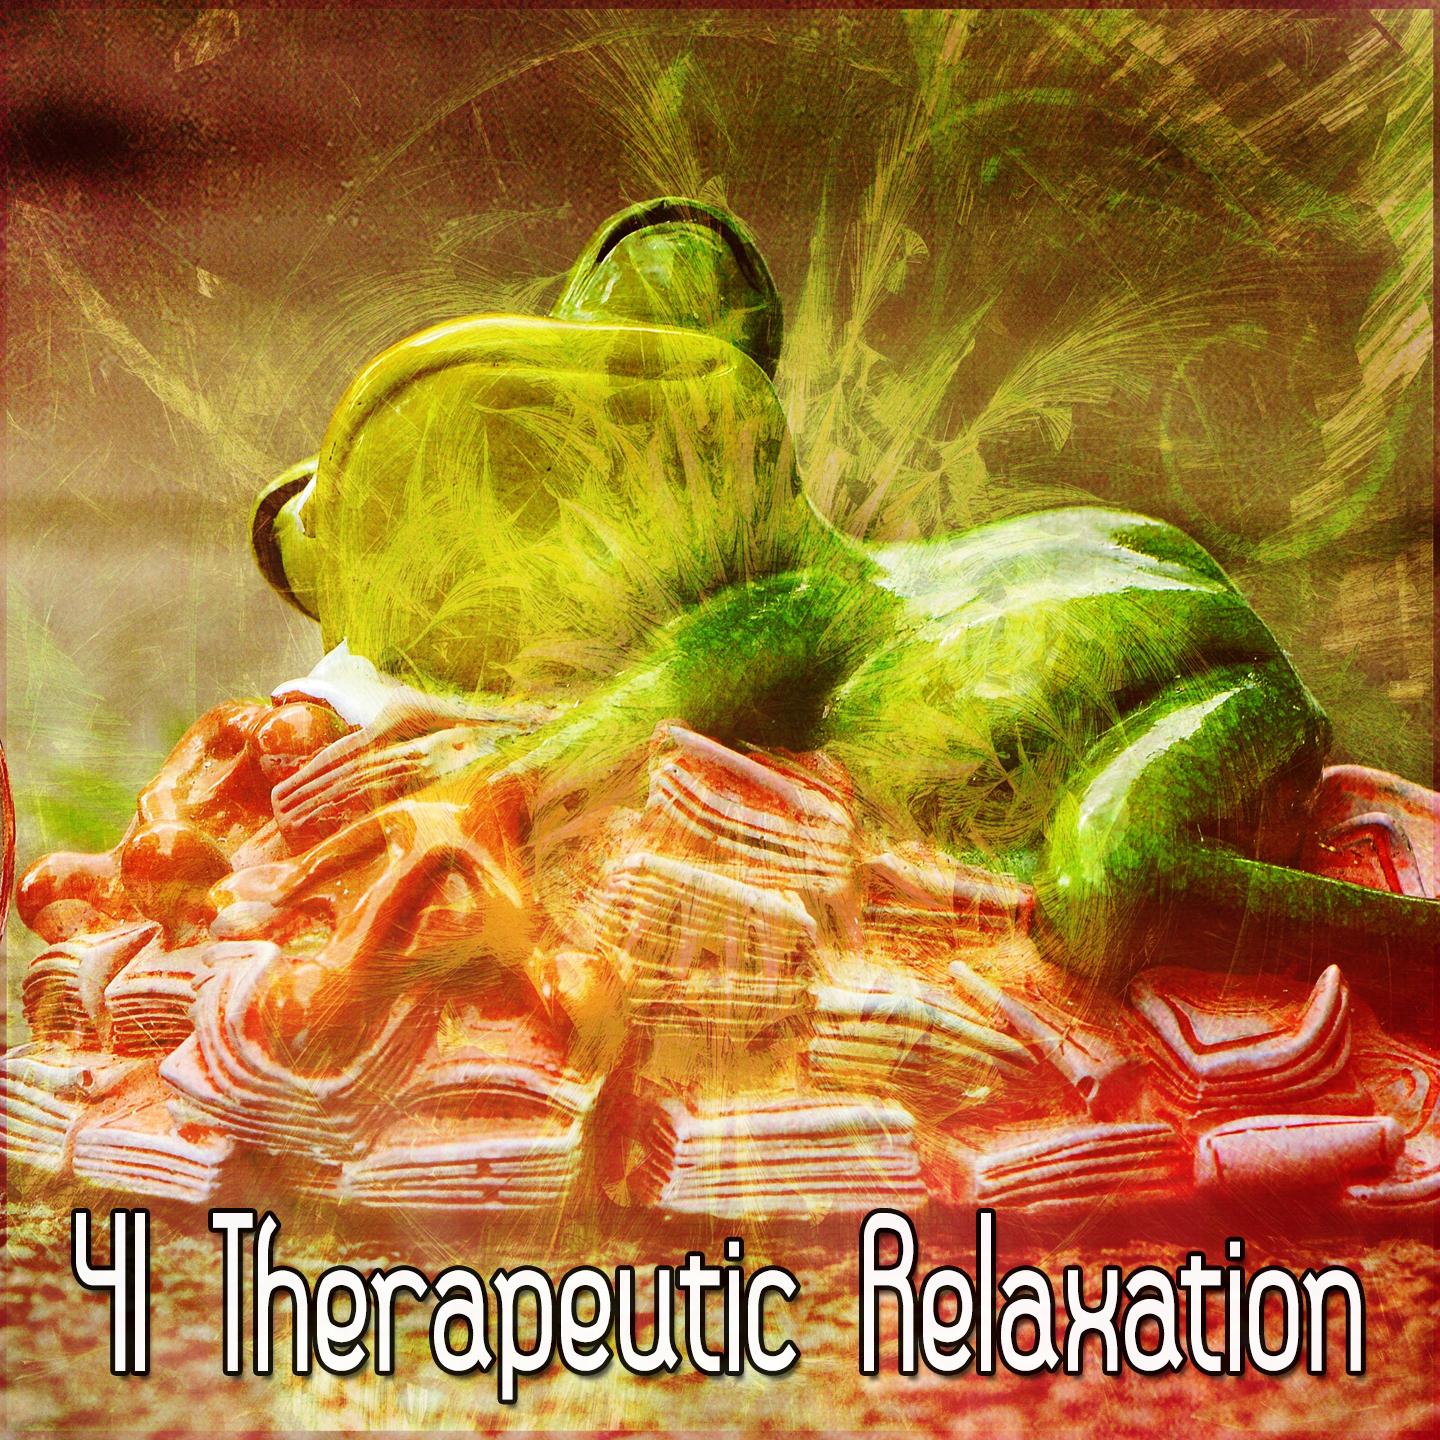 41 Therapeutic Relaxation